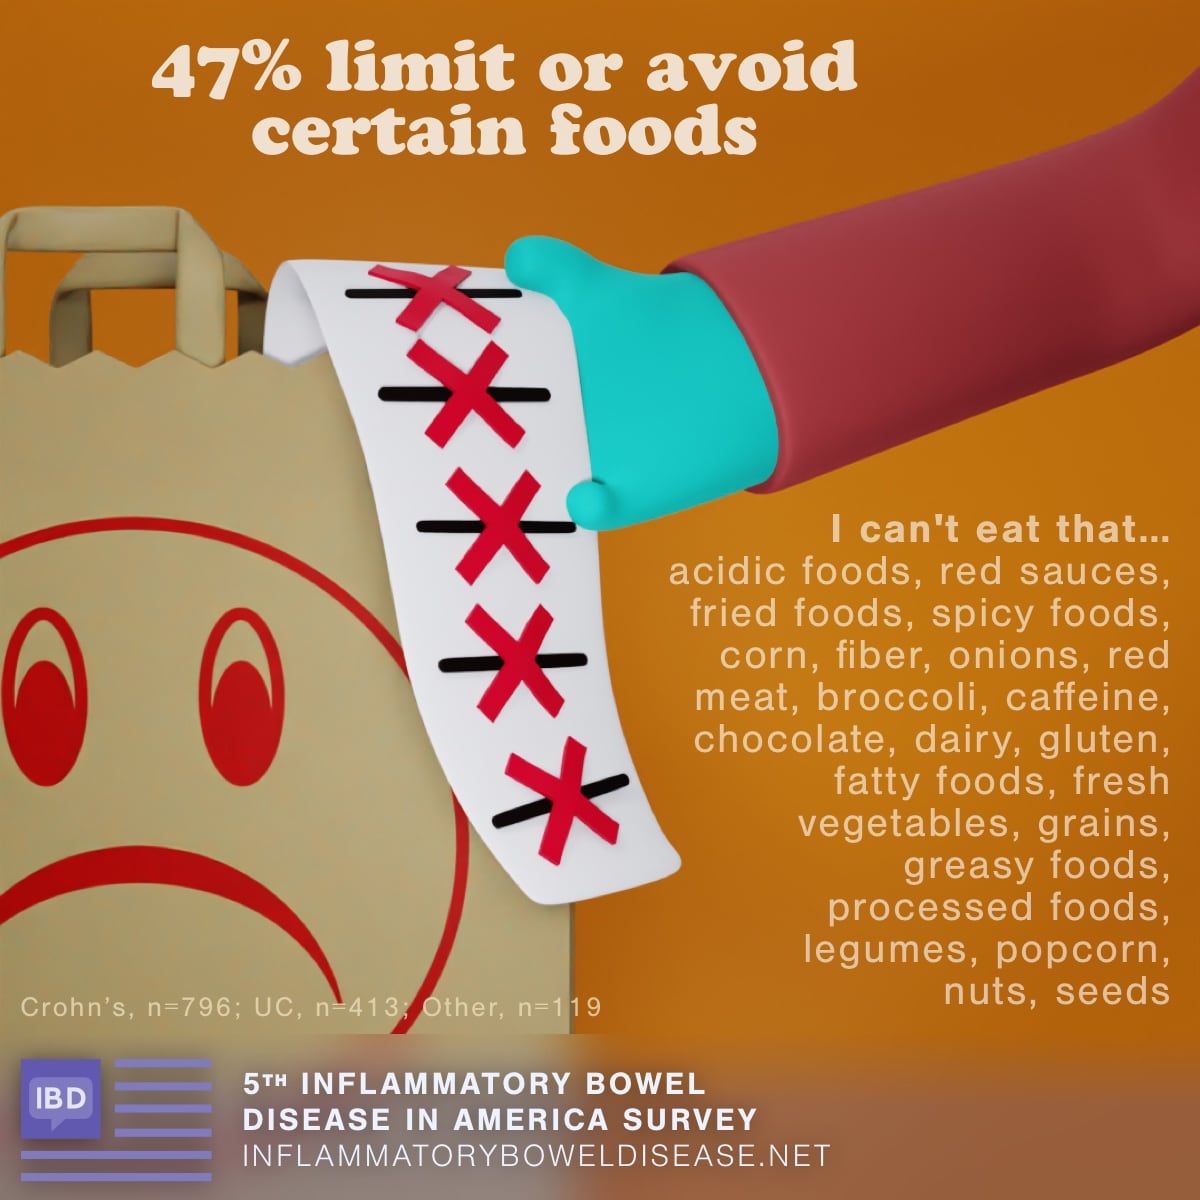 47% of IBD patients avoid or limit certain foods. Survey respondents provided examples that included: acidic foods, red sauces, fried foods, spicy foods, corn, fiber, onions, red meat, broccoli, caffeine, chocolate, dairy, gluten, fatty foods, fresh vegetables, grains, greasy foods, processed foods, legumes, popcorn, nuts, and seeds.